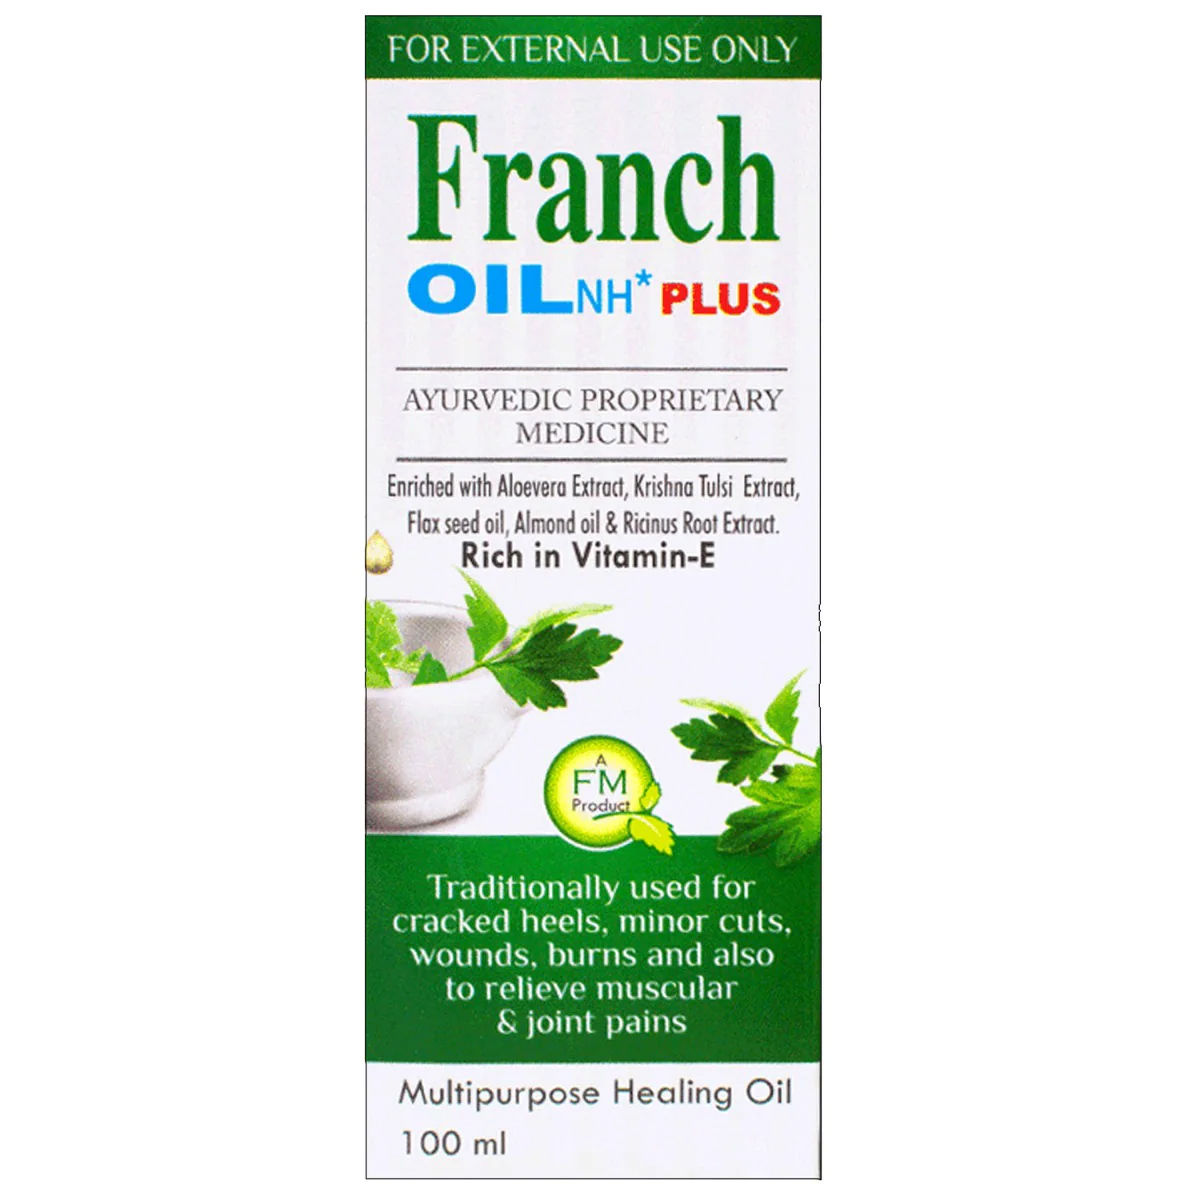 Franch Multipurpose Healing Oil, 100 ml Price, Uses, Side Effects,  Composition - Apollo Pharmacy